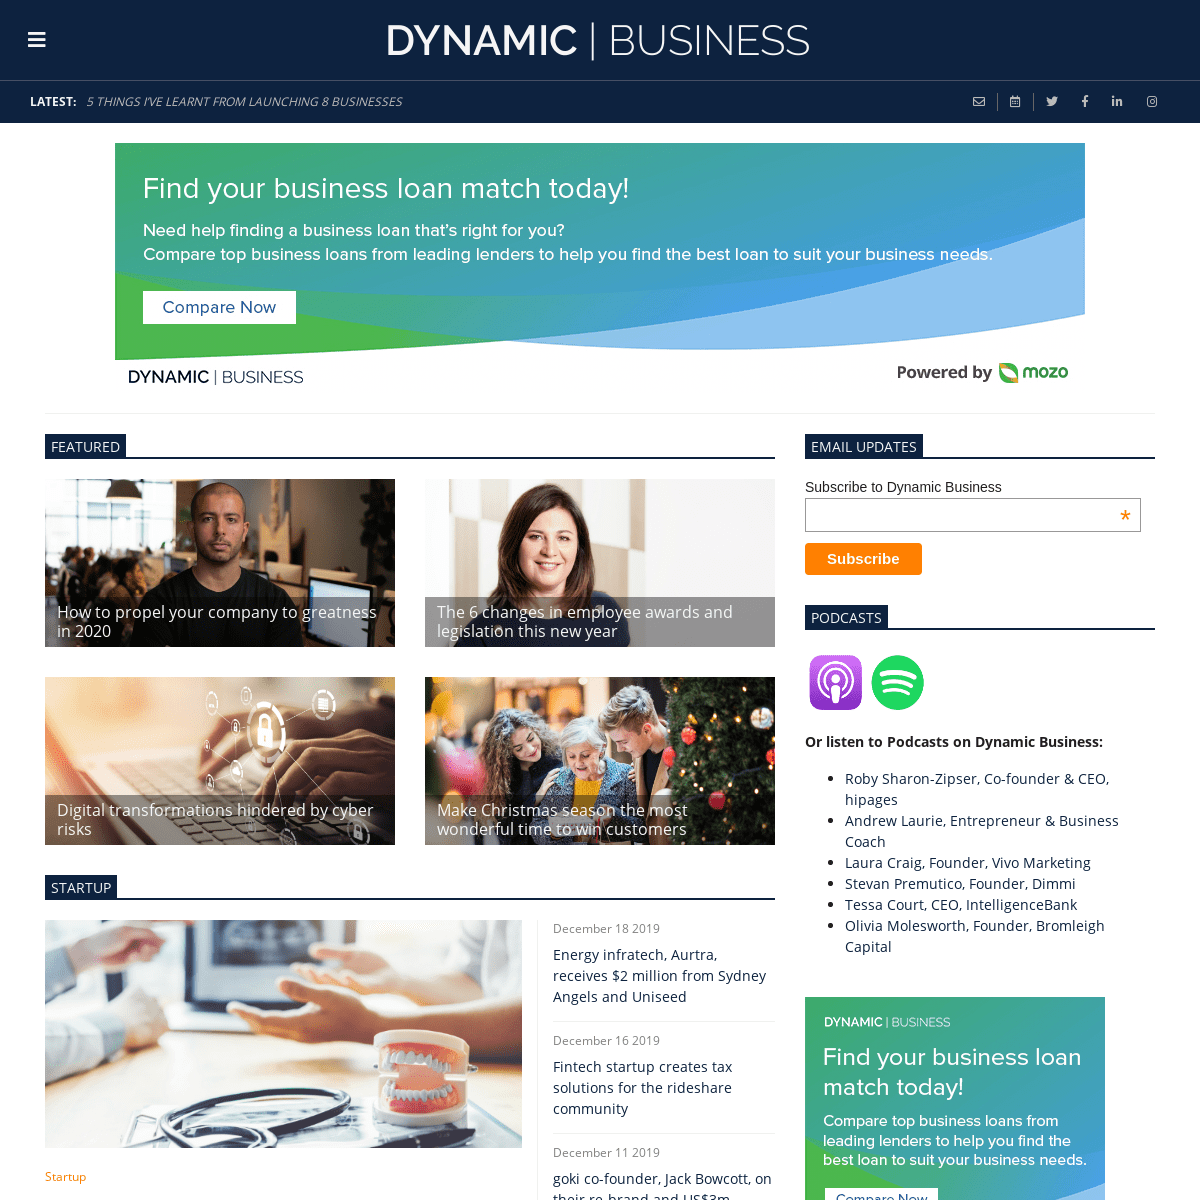 A complete backup of dynamicbusiness.com.au